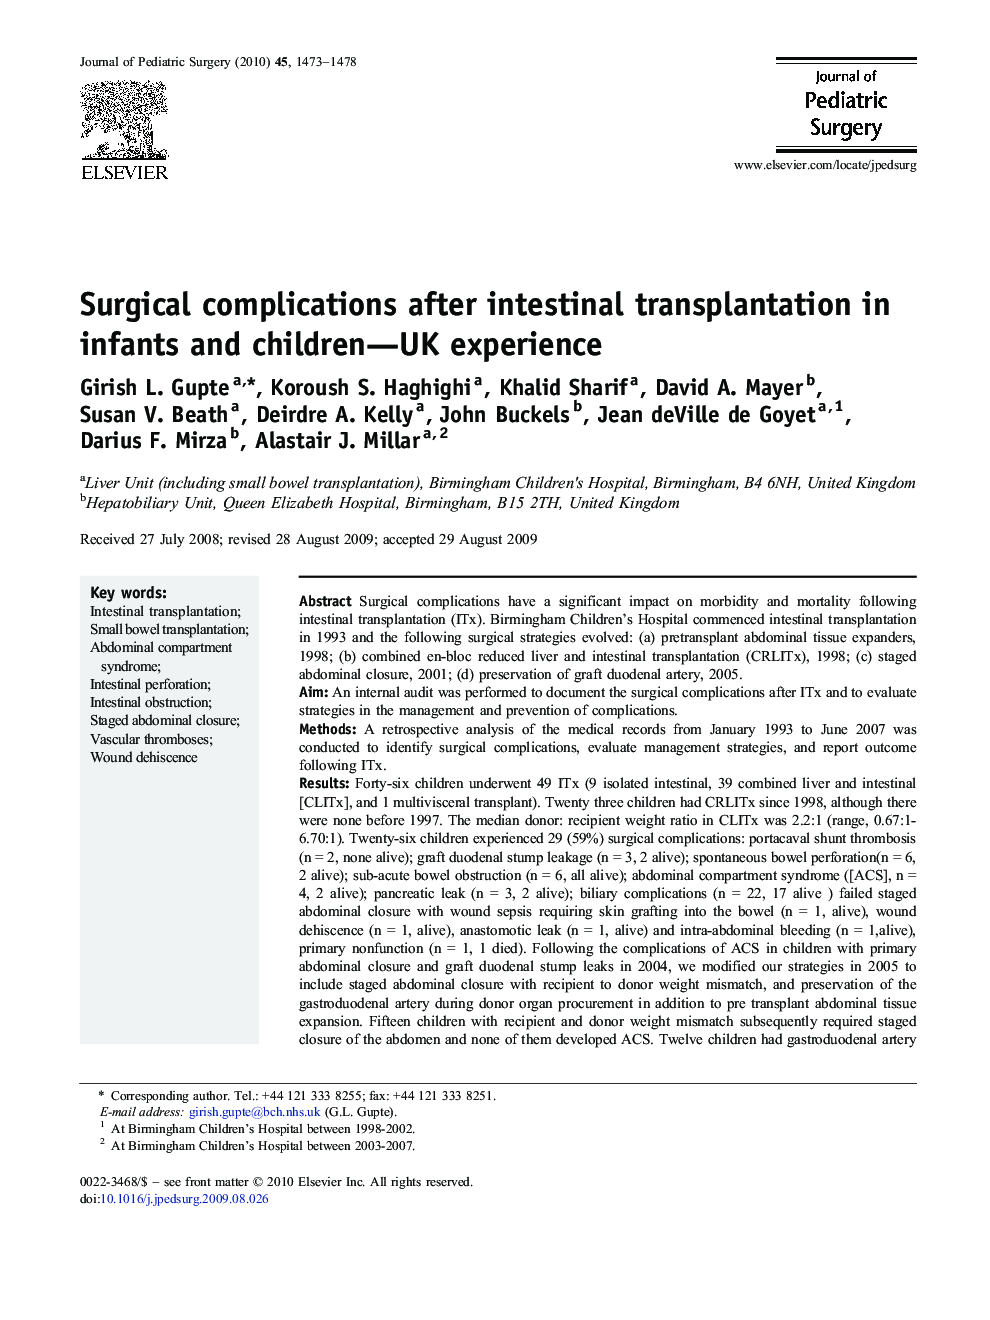 Surgical complications after intestinal transplantation in infants and children—UK experience